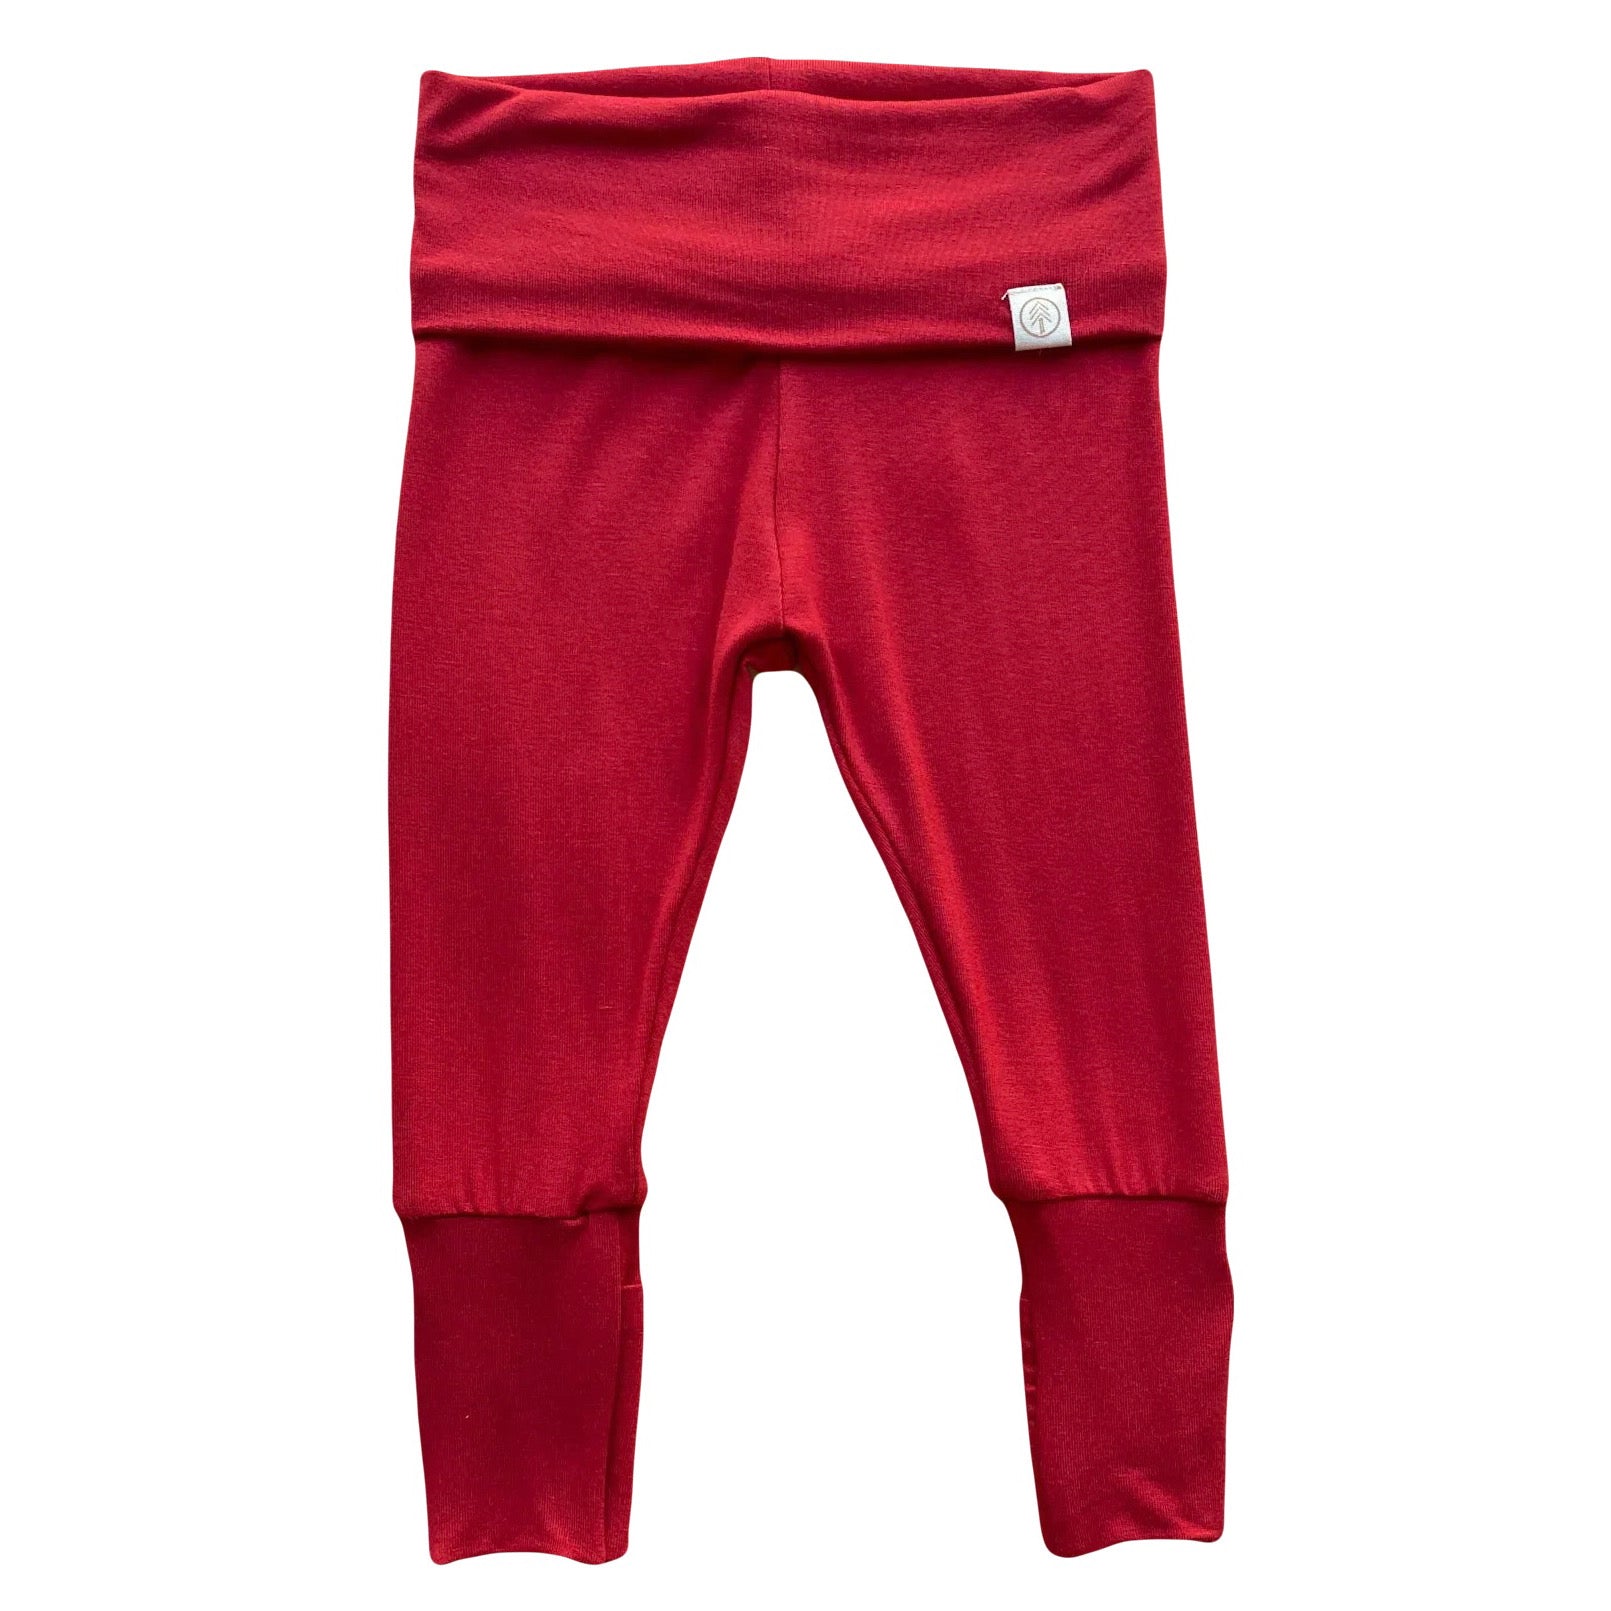 Made in USA organic bamboo baby leggings - Infant pants - Red - With Footies - Fold over feet covers